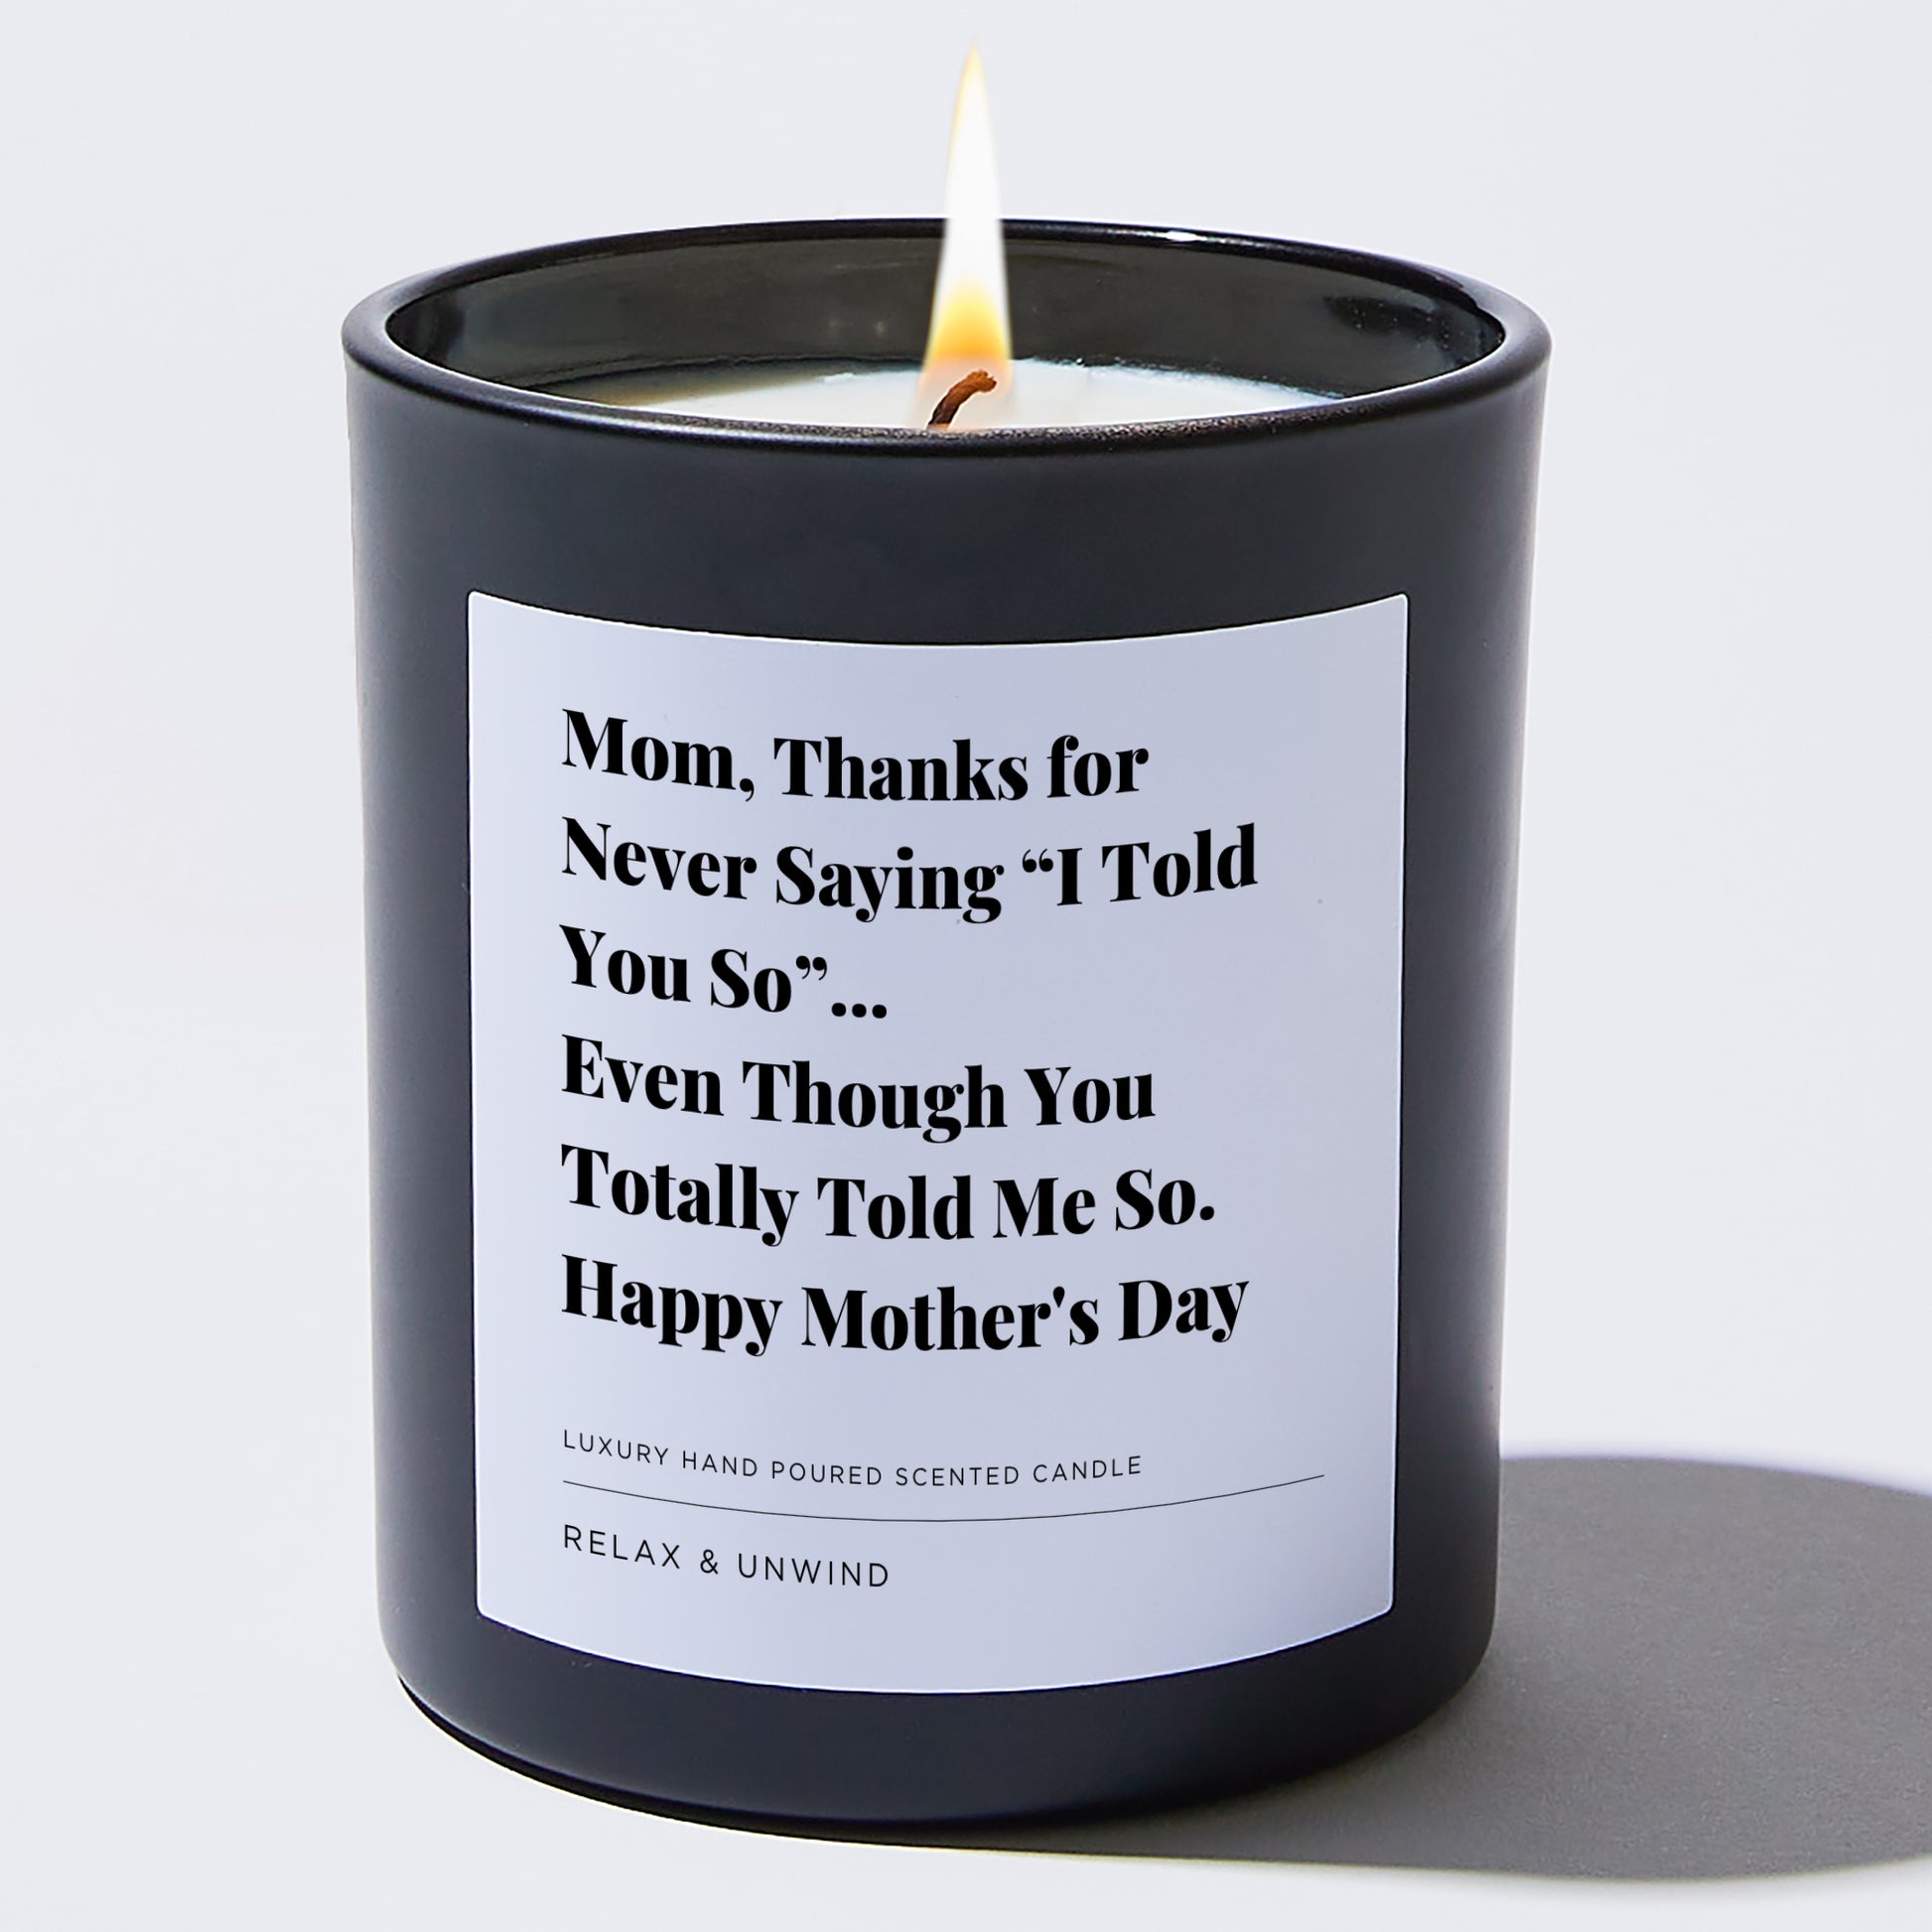 Gift for Mom Mom, thanks for never saying 'I told you so'... even though you totally told me so. Happy Mother's Day